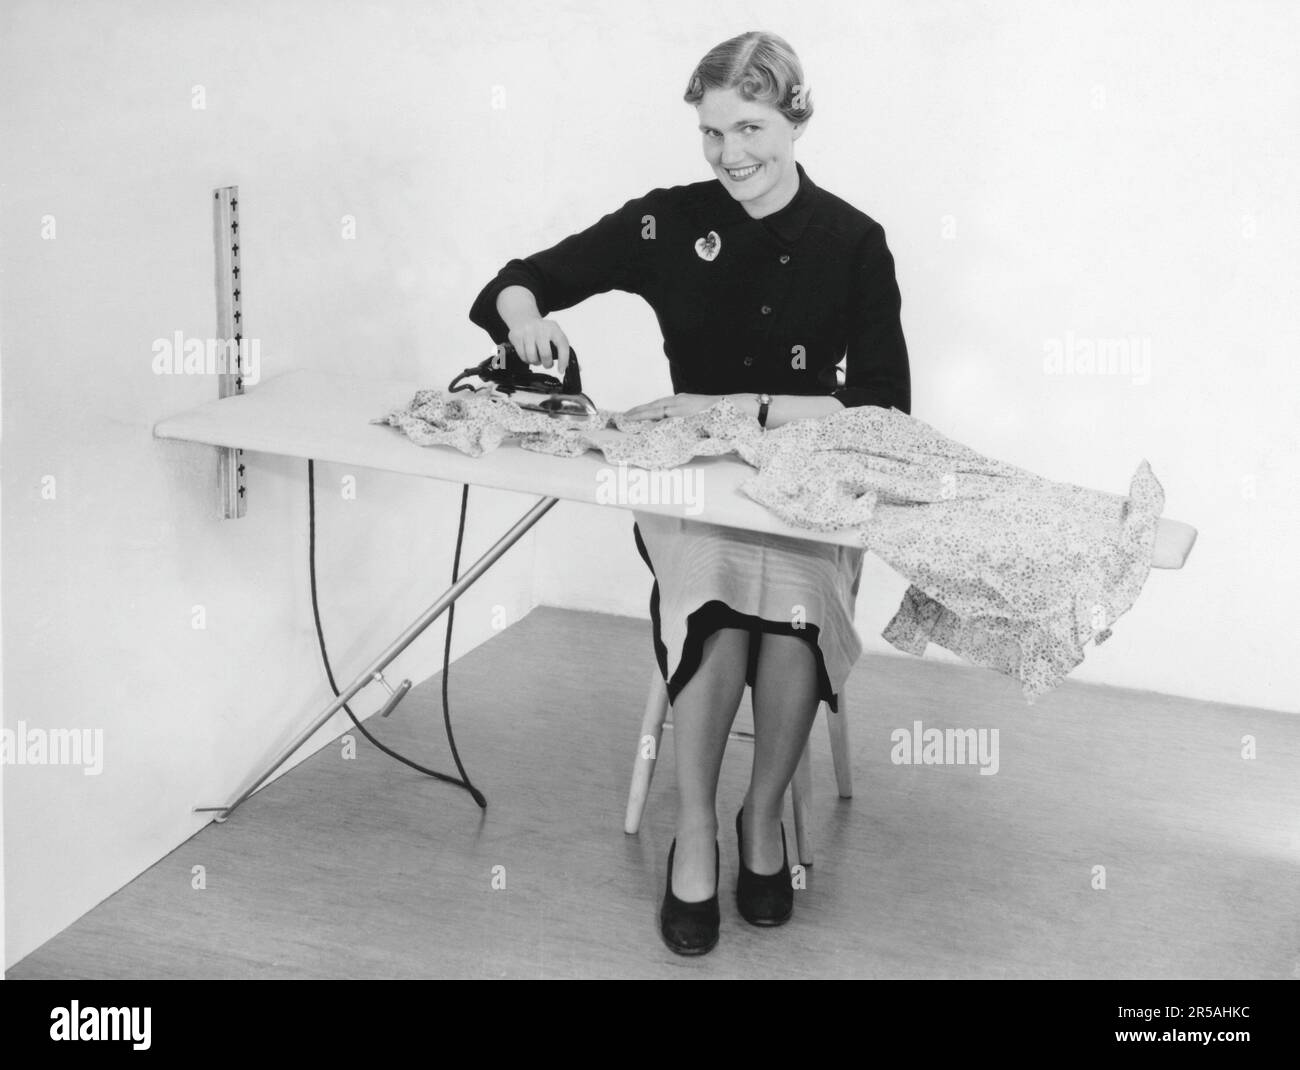 Ironing in the 1950s. A woman seen ironing her clothes. Sweden 1955. Stock Photo